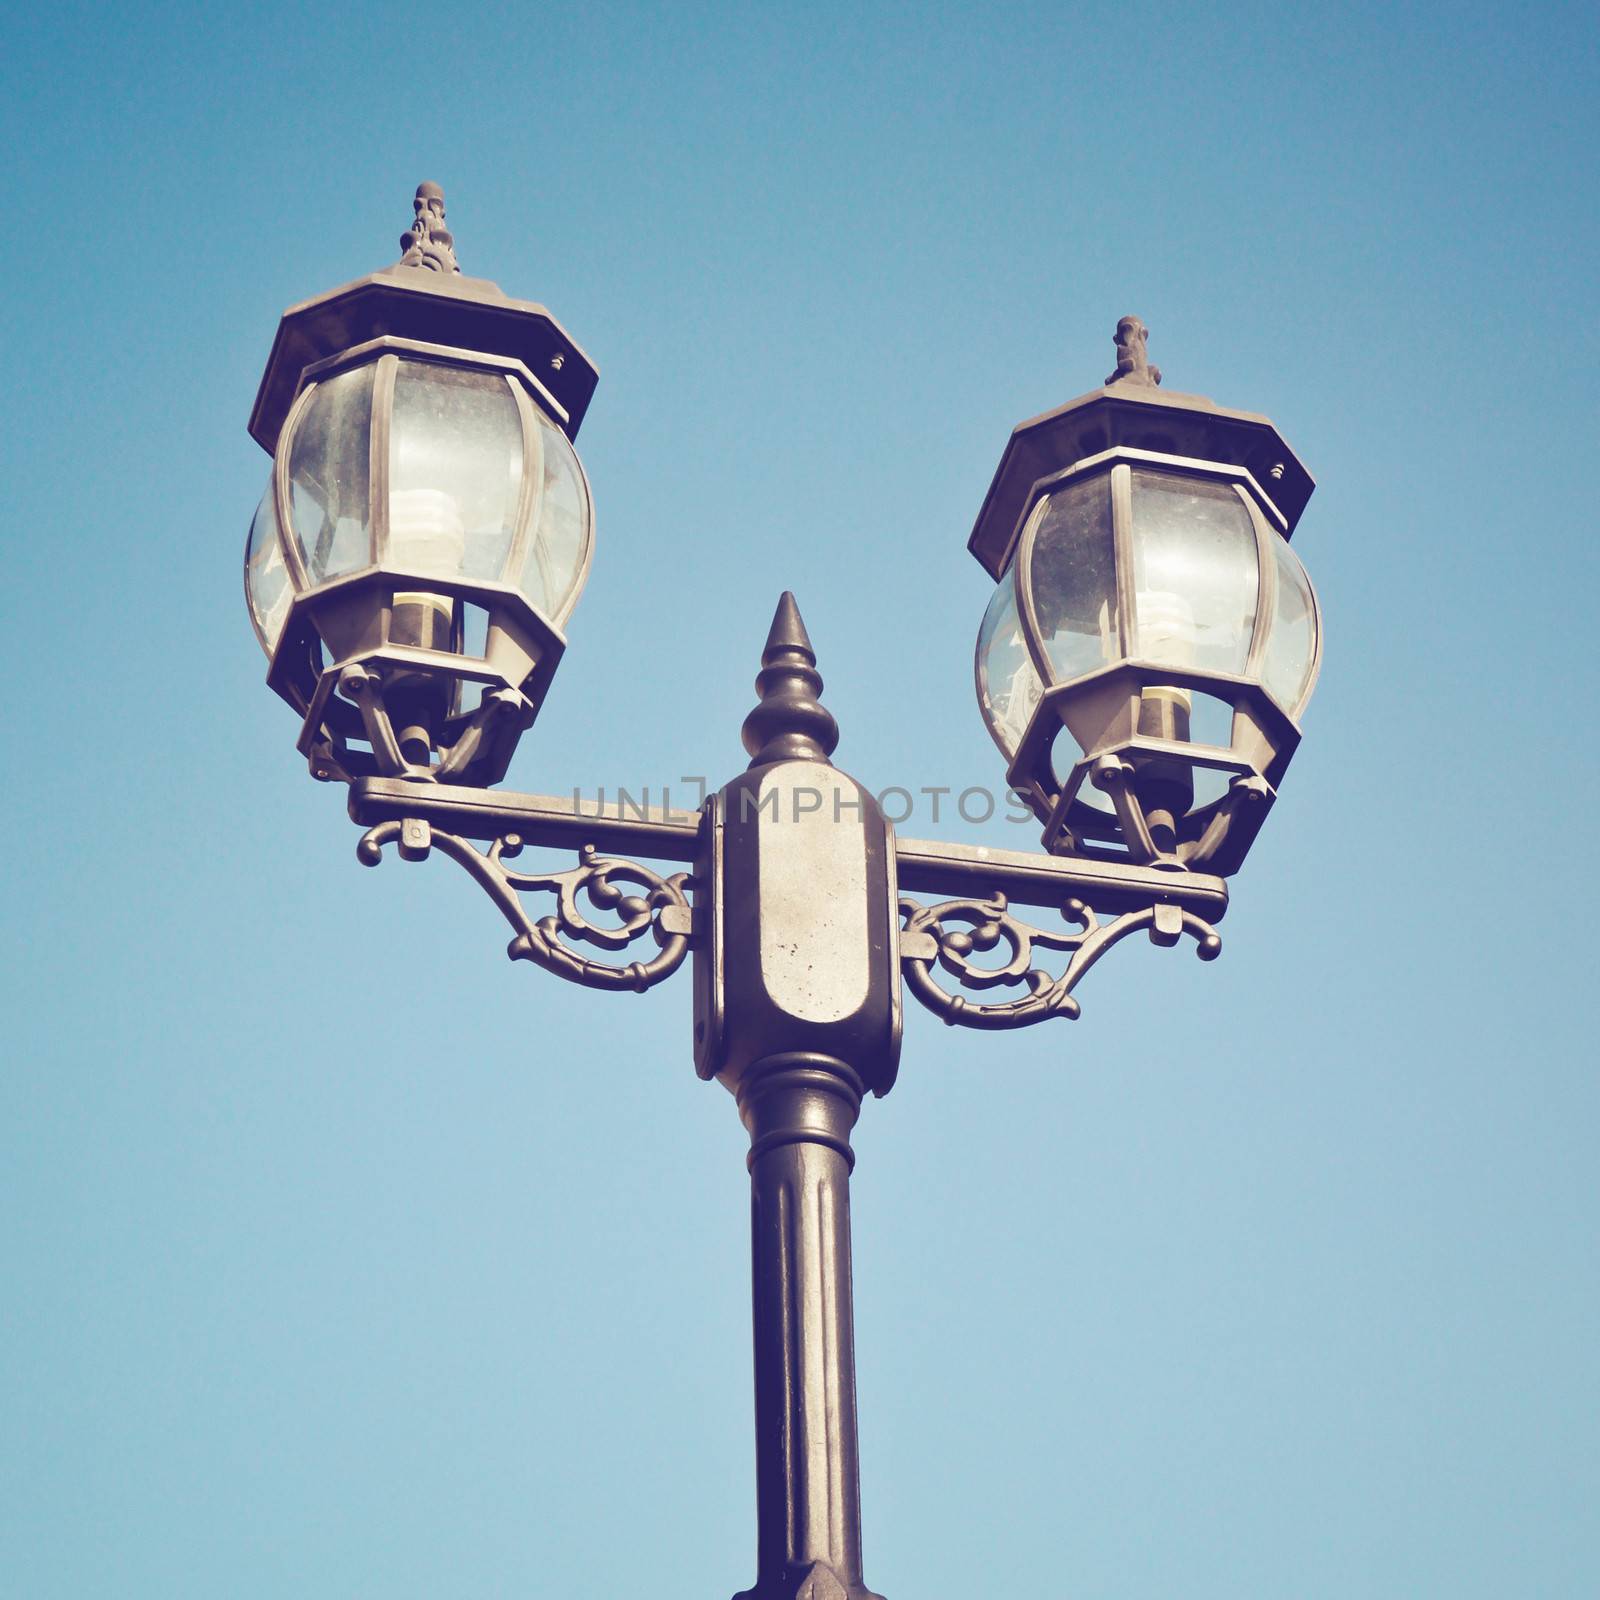 Old vintage street light against blue sky with retro filter effe by nuchylee